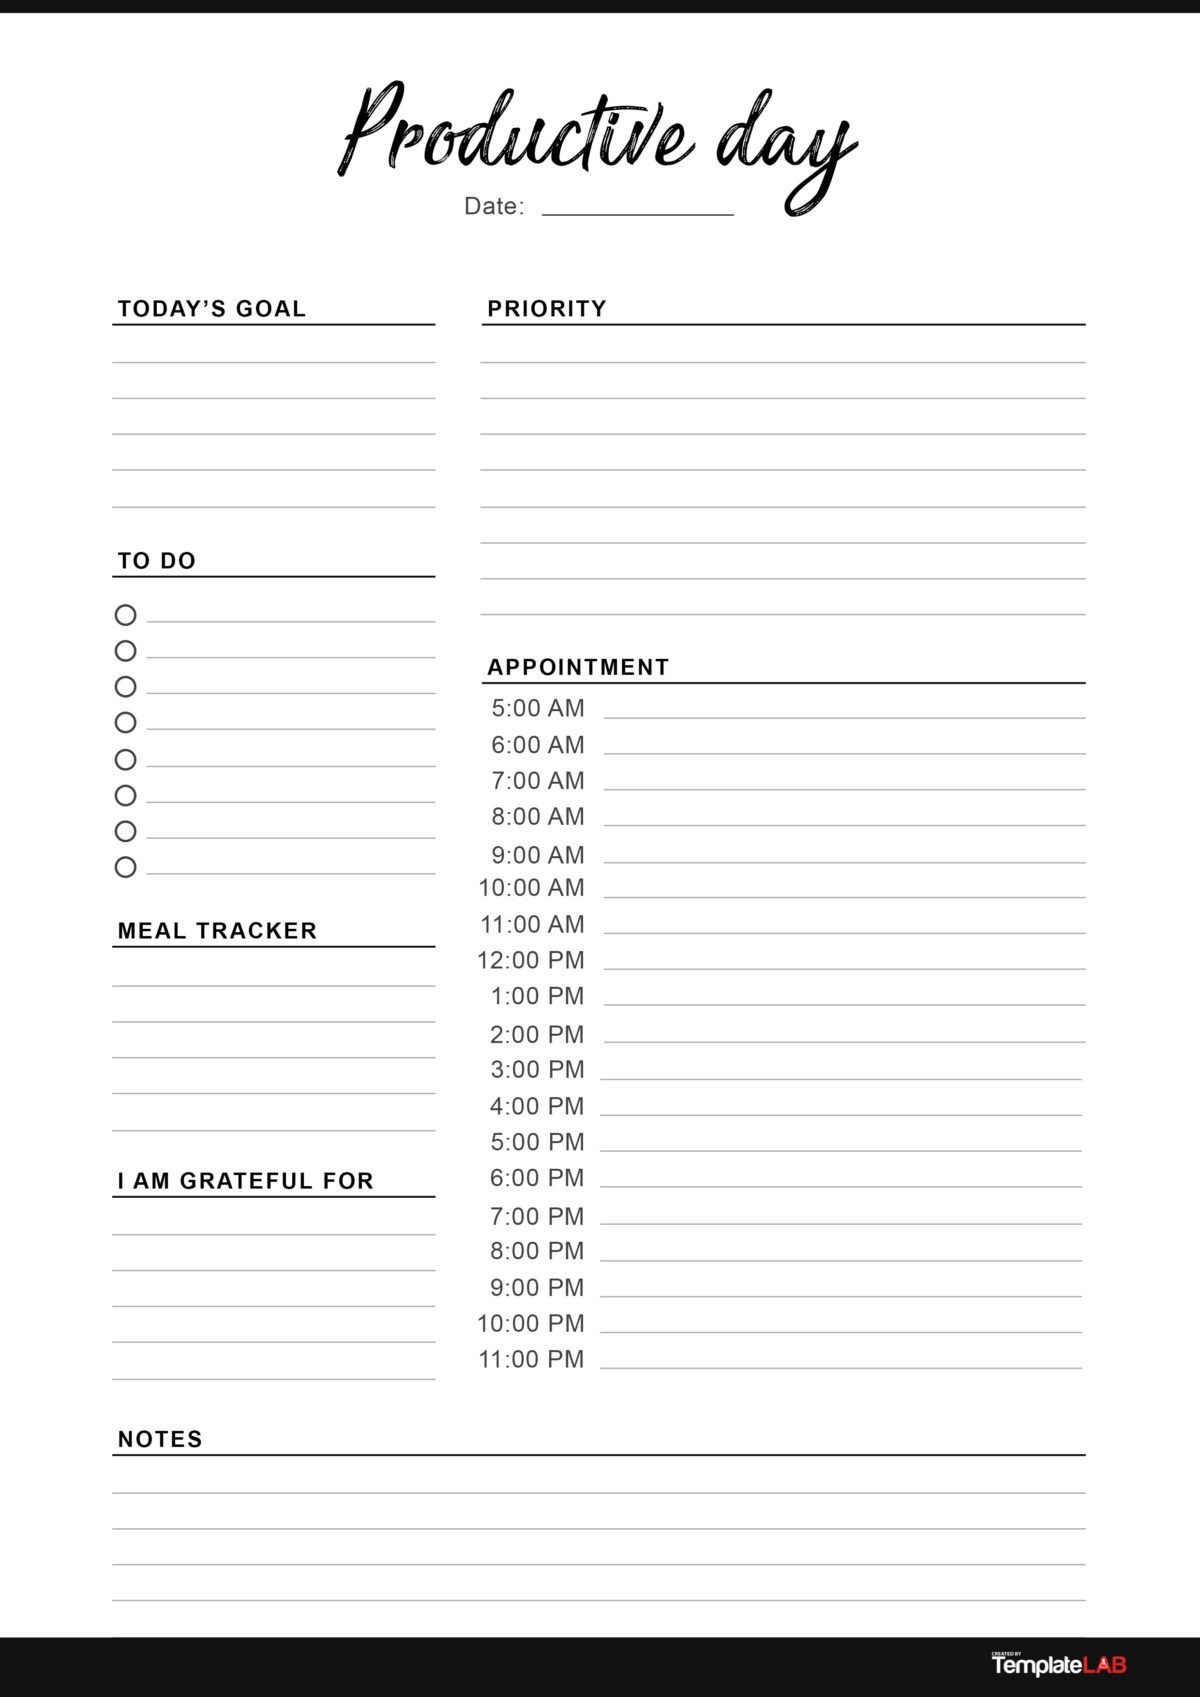 Weekend Schedule Template from templatelab.com